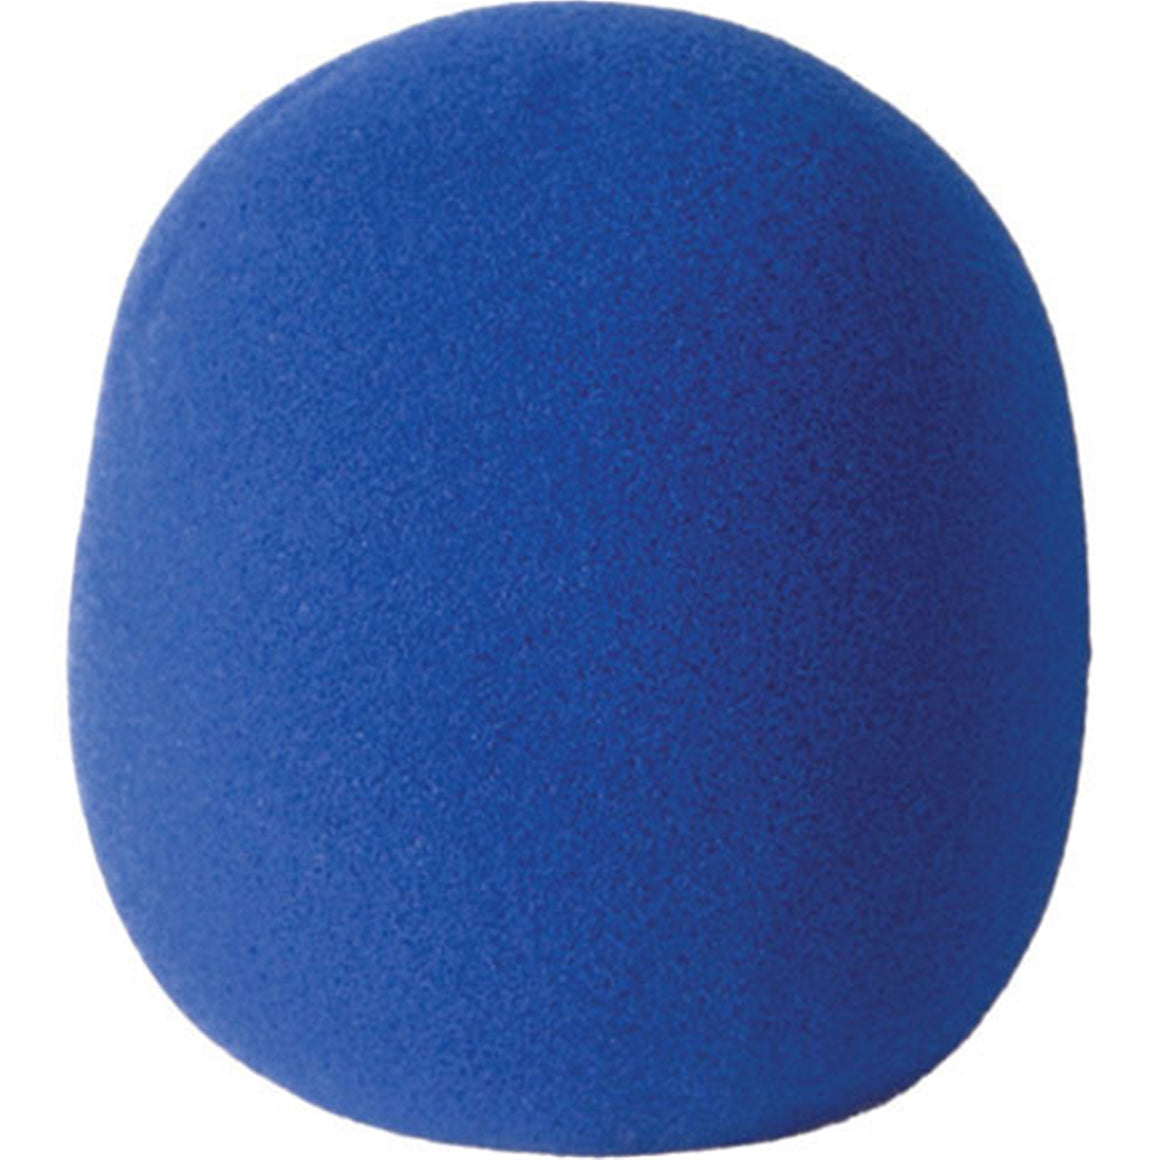 ON STAGE ASWS58BL Mic Windscreen Blue